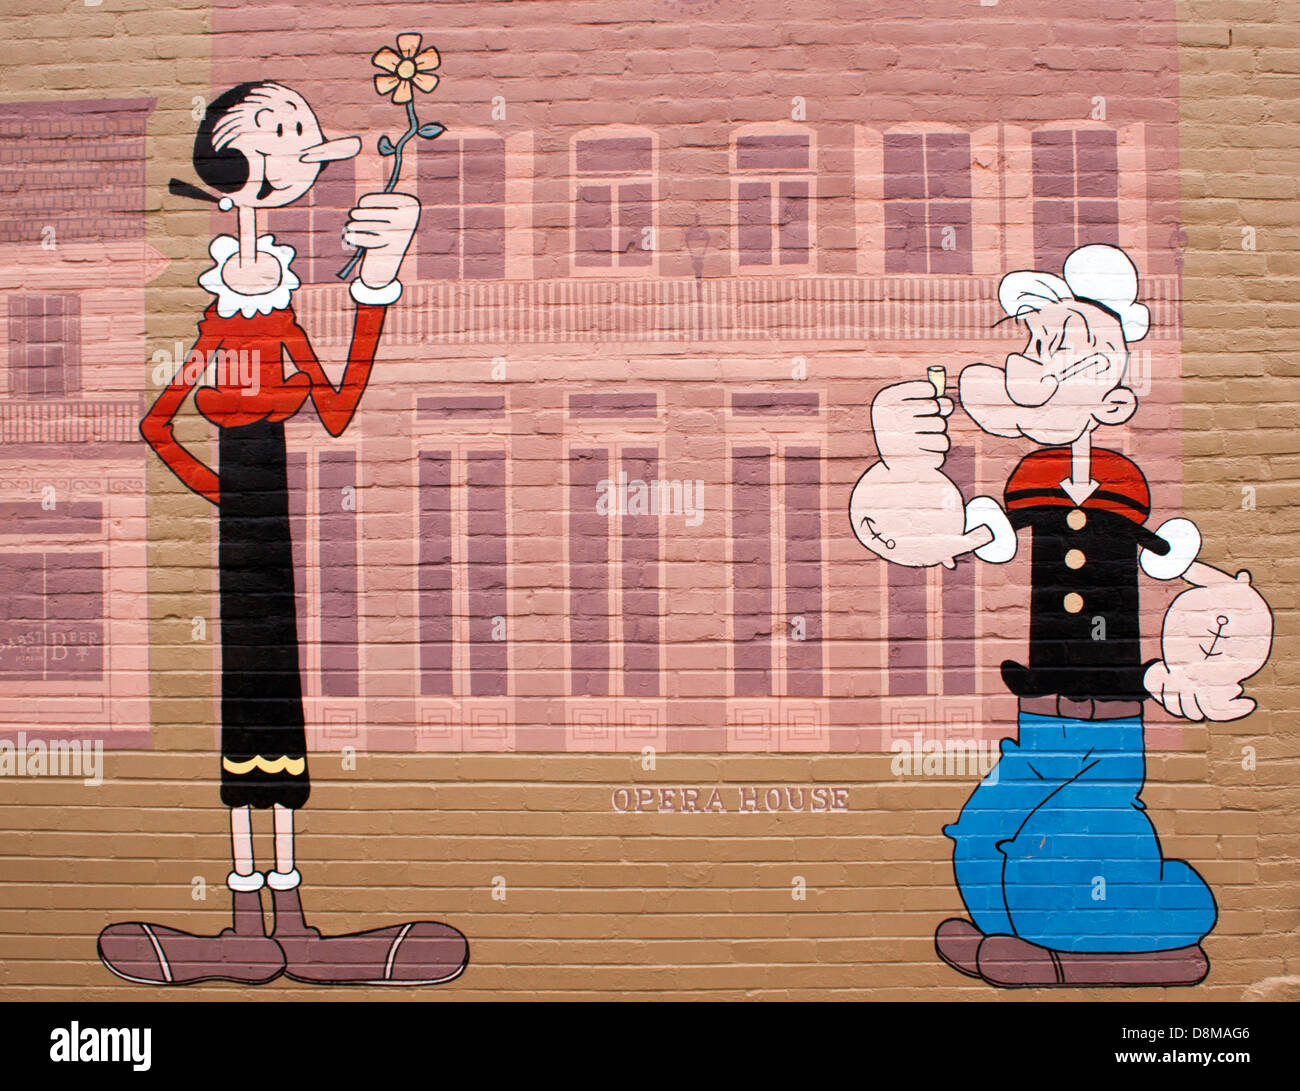 popeye and olive oil kissing